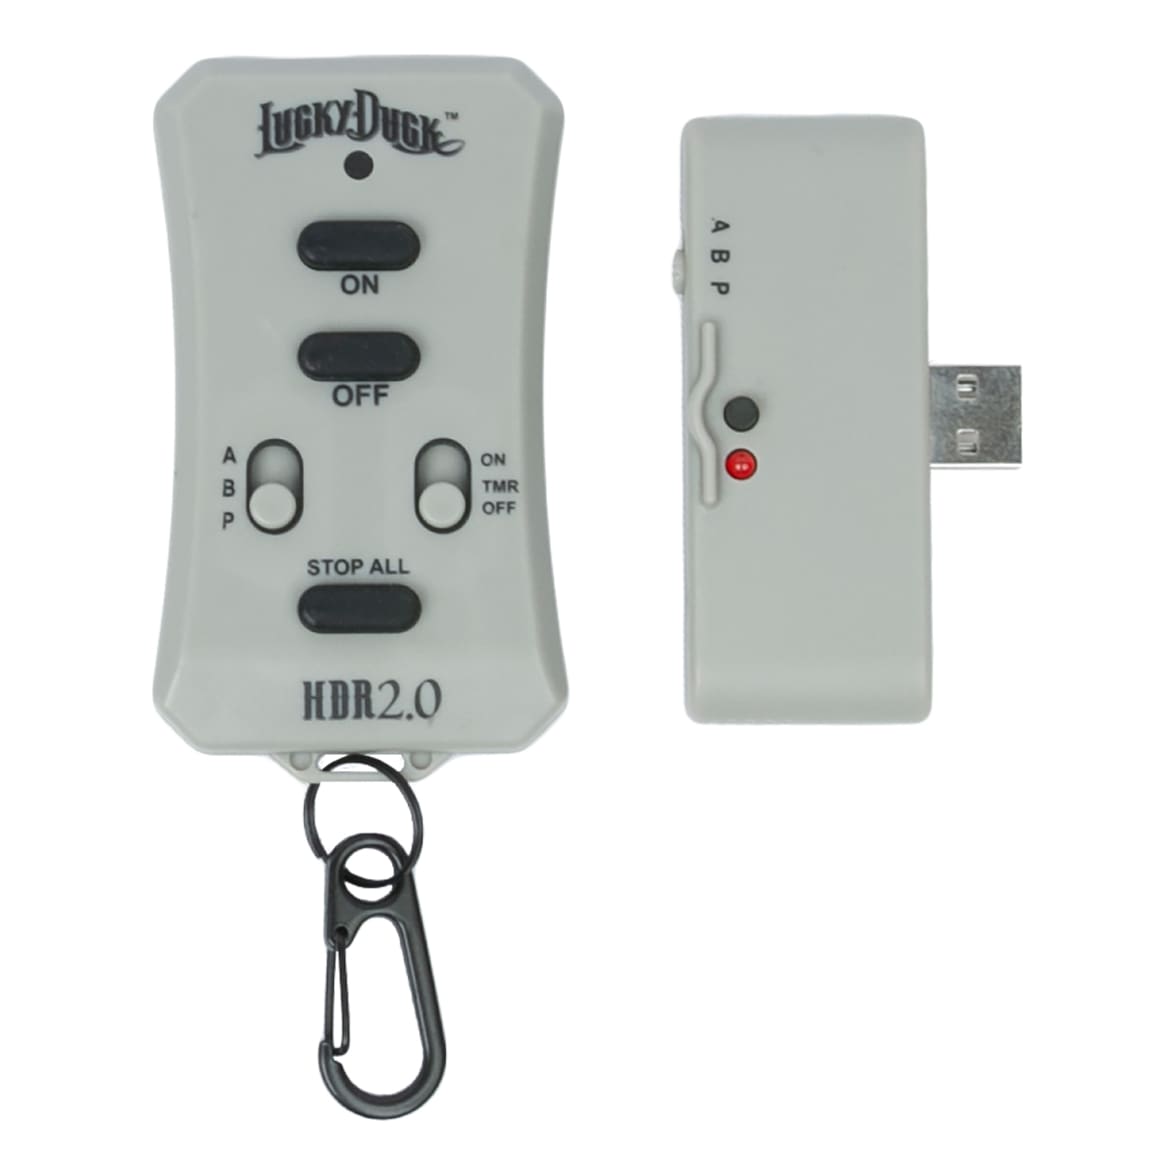 Lucky Duck HD Remote Kit 2.0